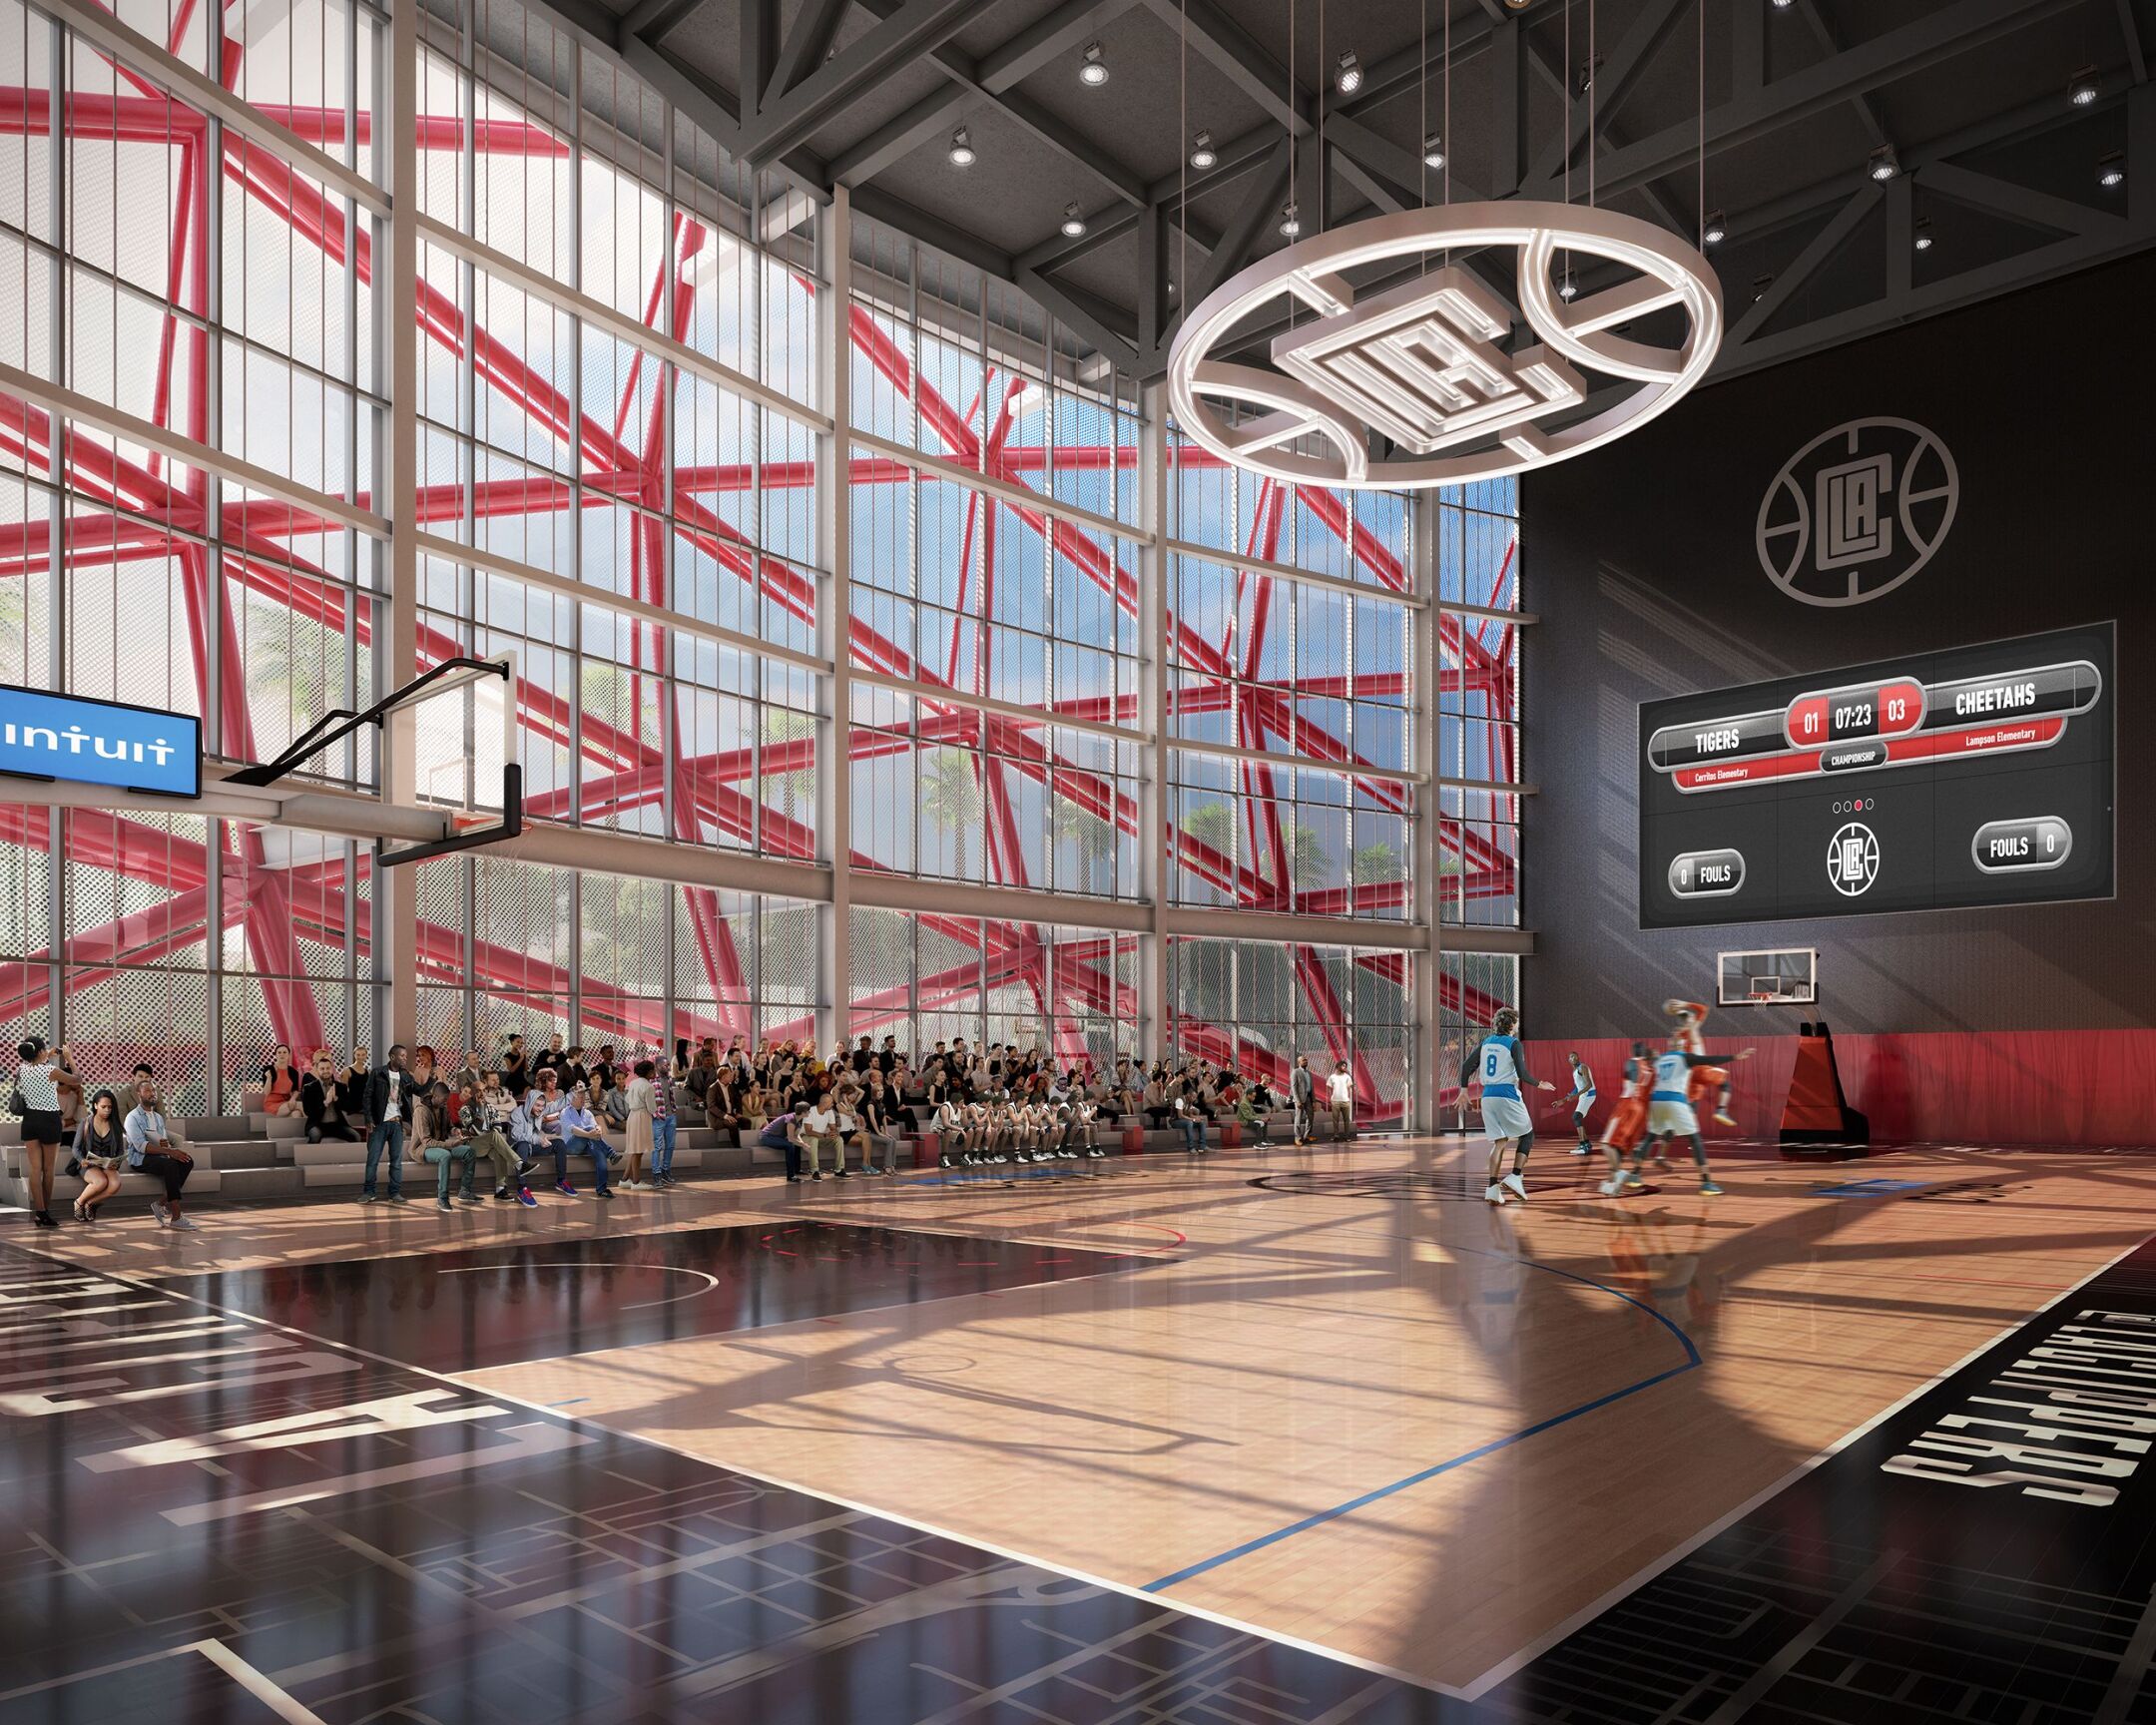 Artist renderings of the Clippers' new arena The Intuit Dome Los